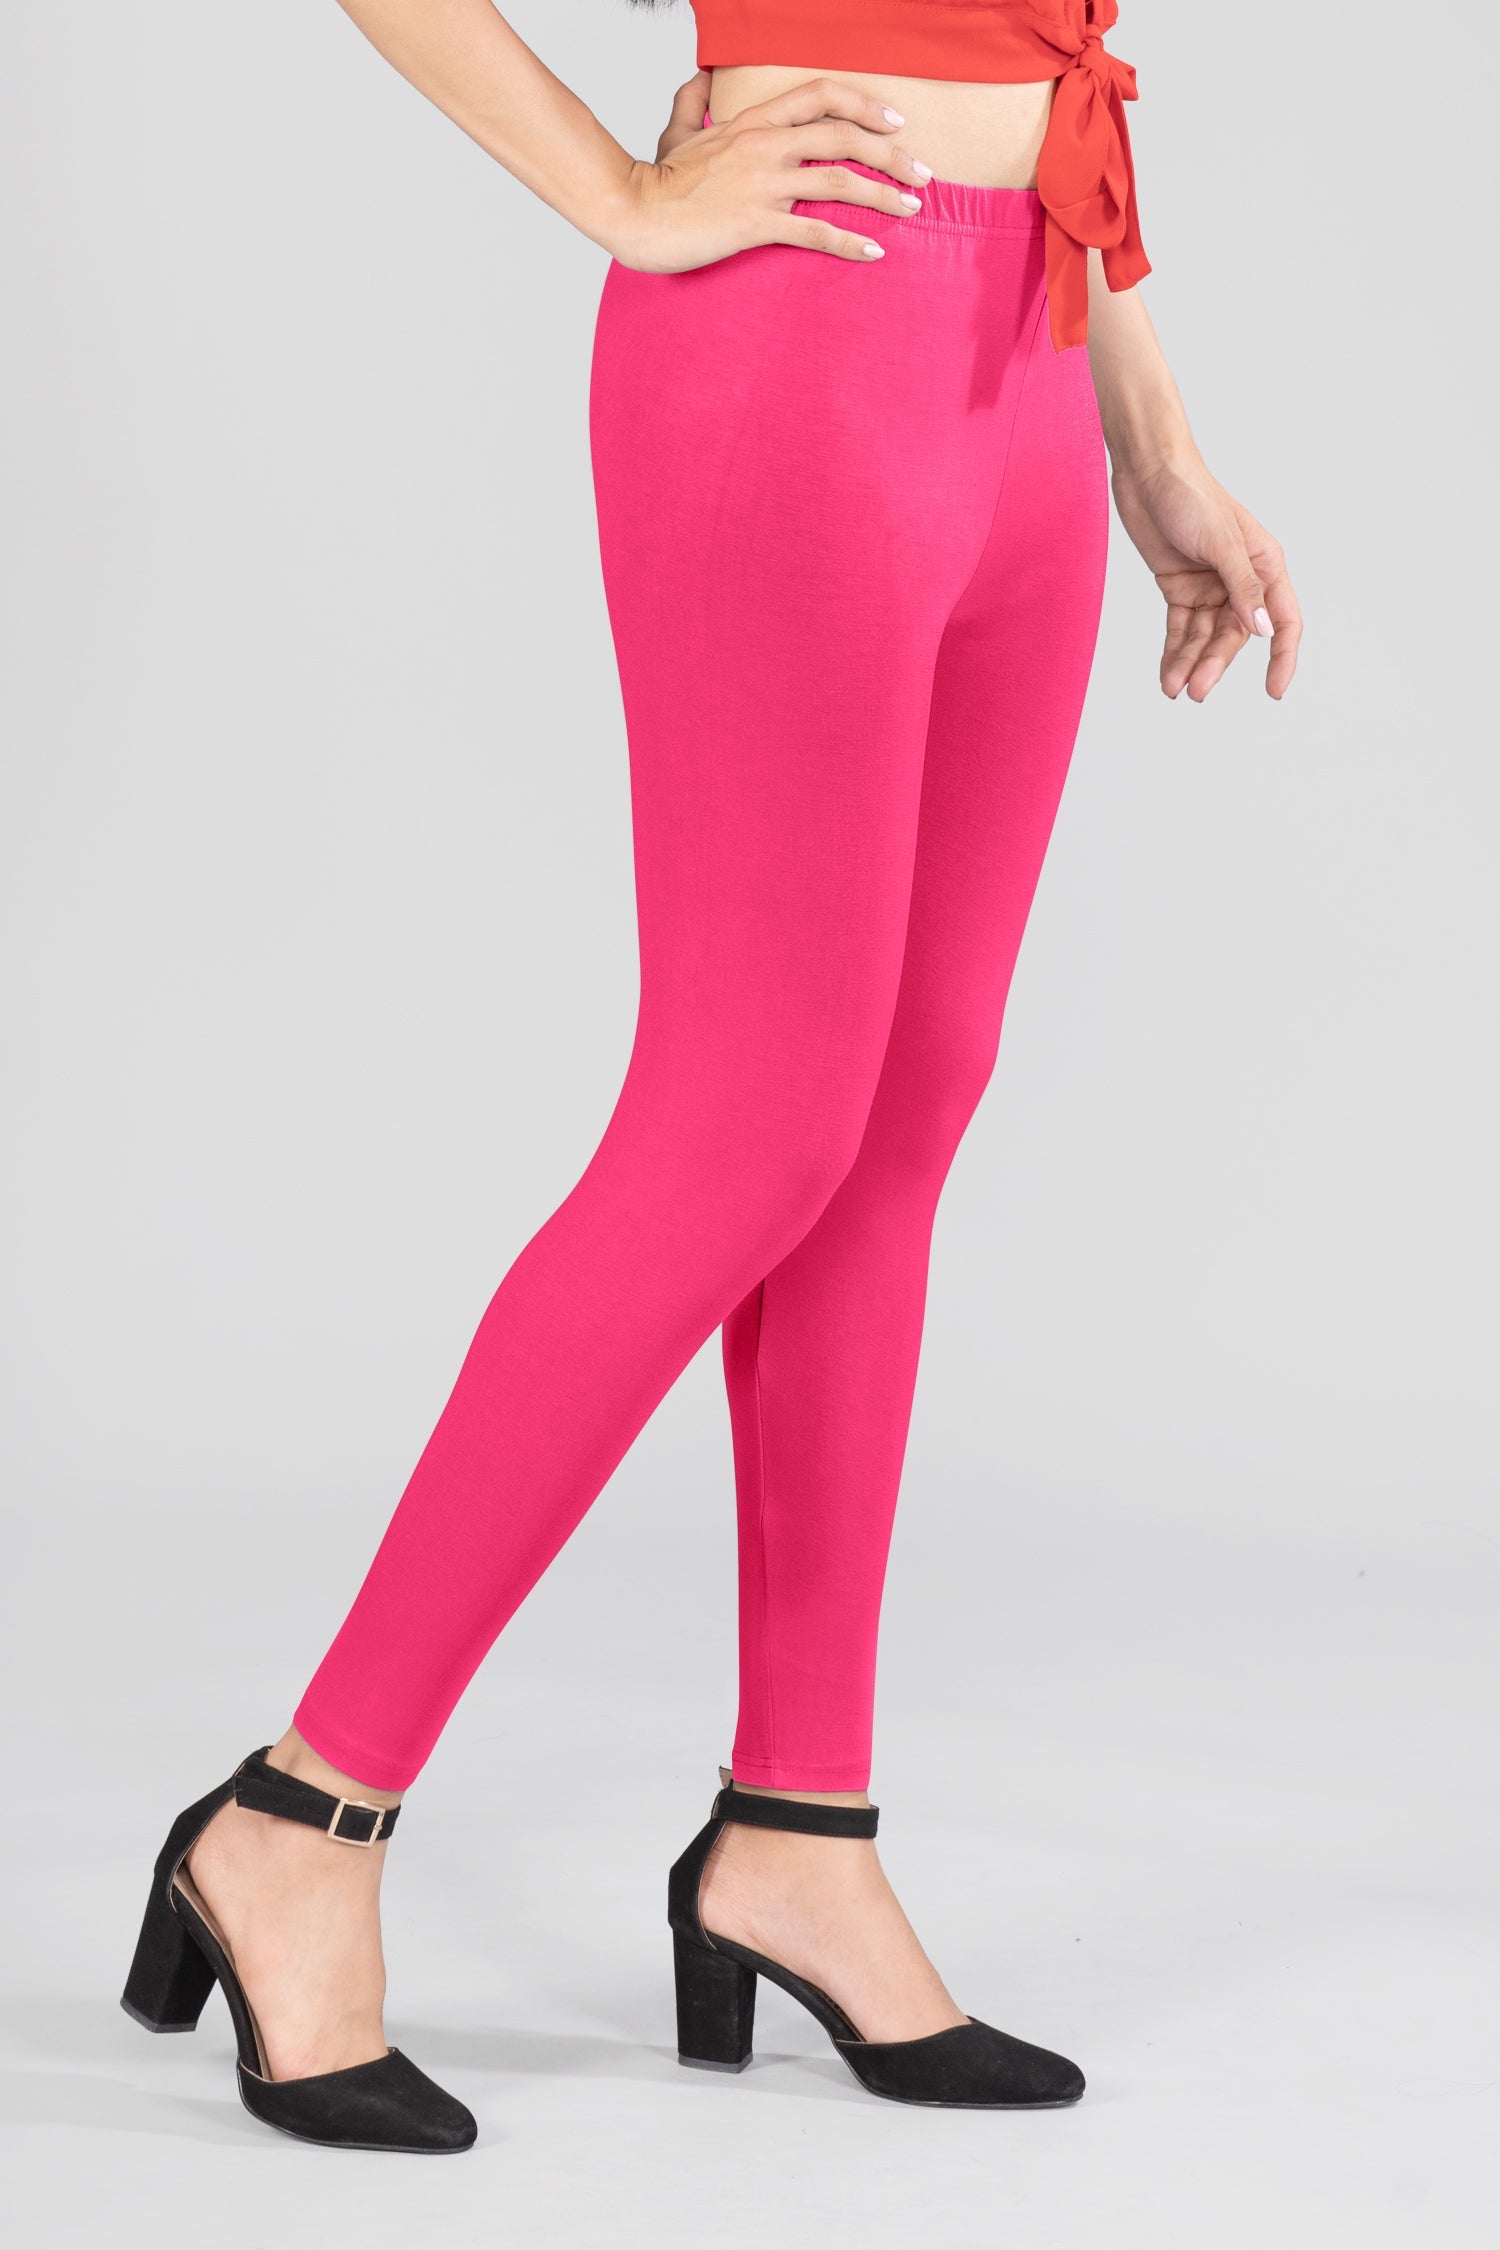 Passion Pink Viscose Ankle Leggings